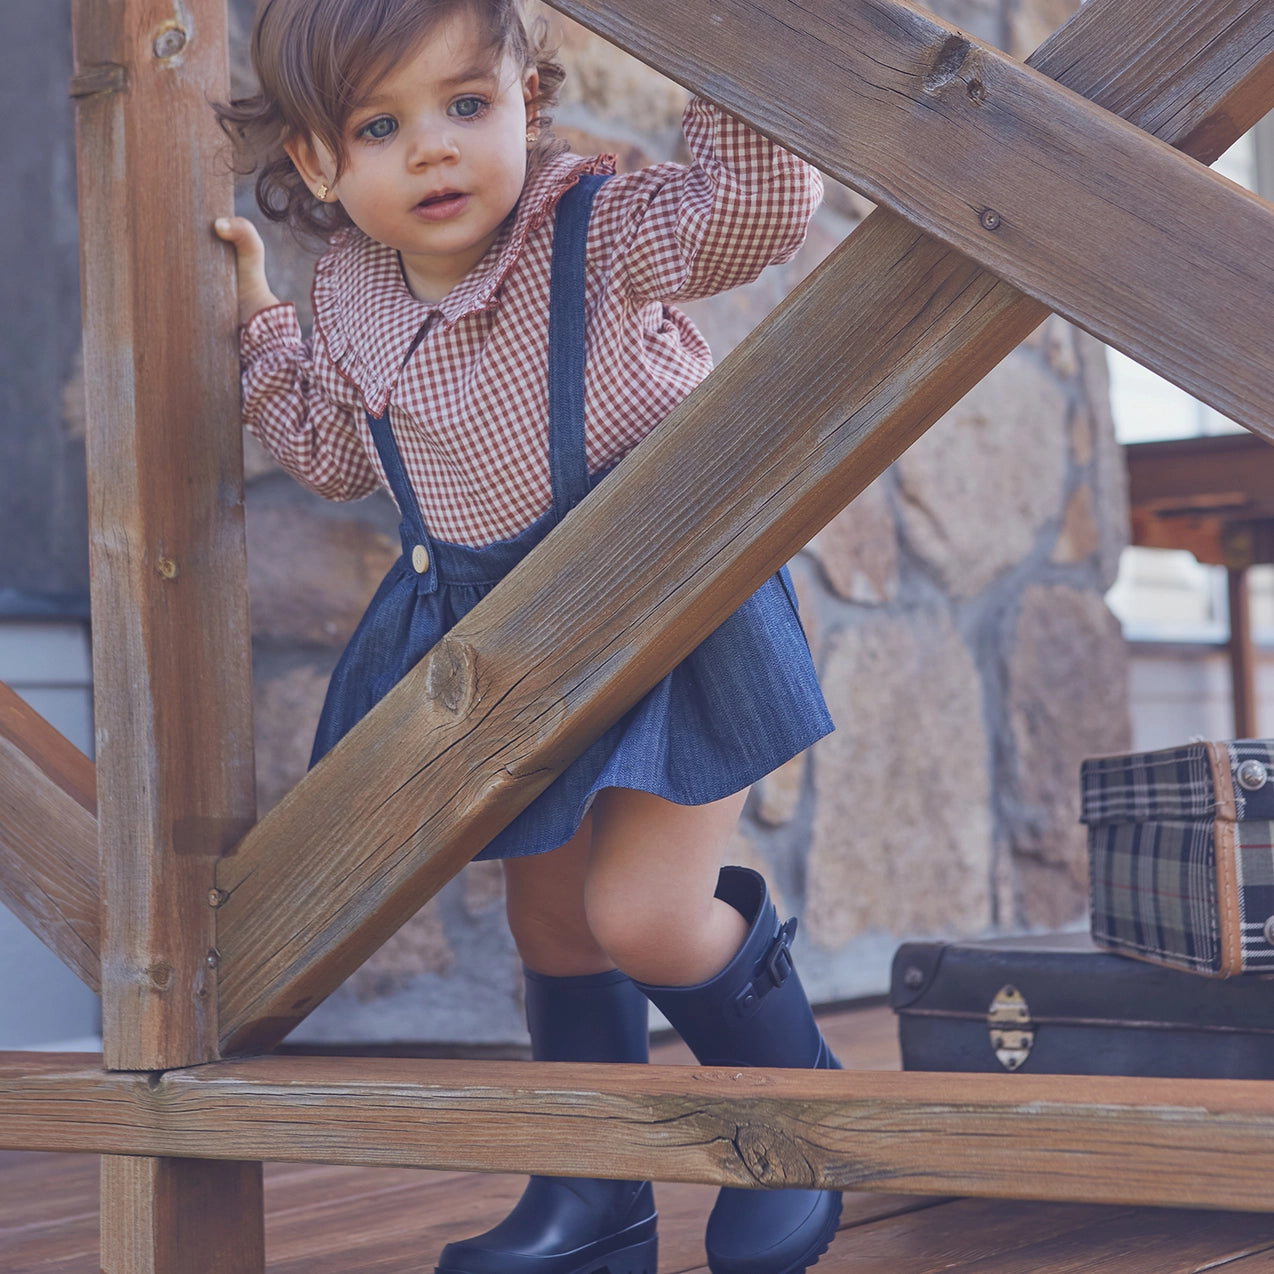 Baby Girl's Blouse in Vichy Caldera and White Plaid